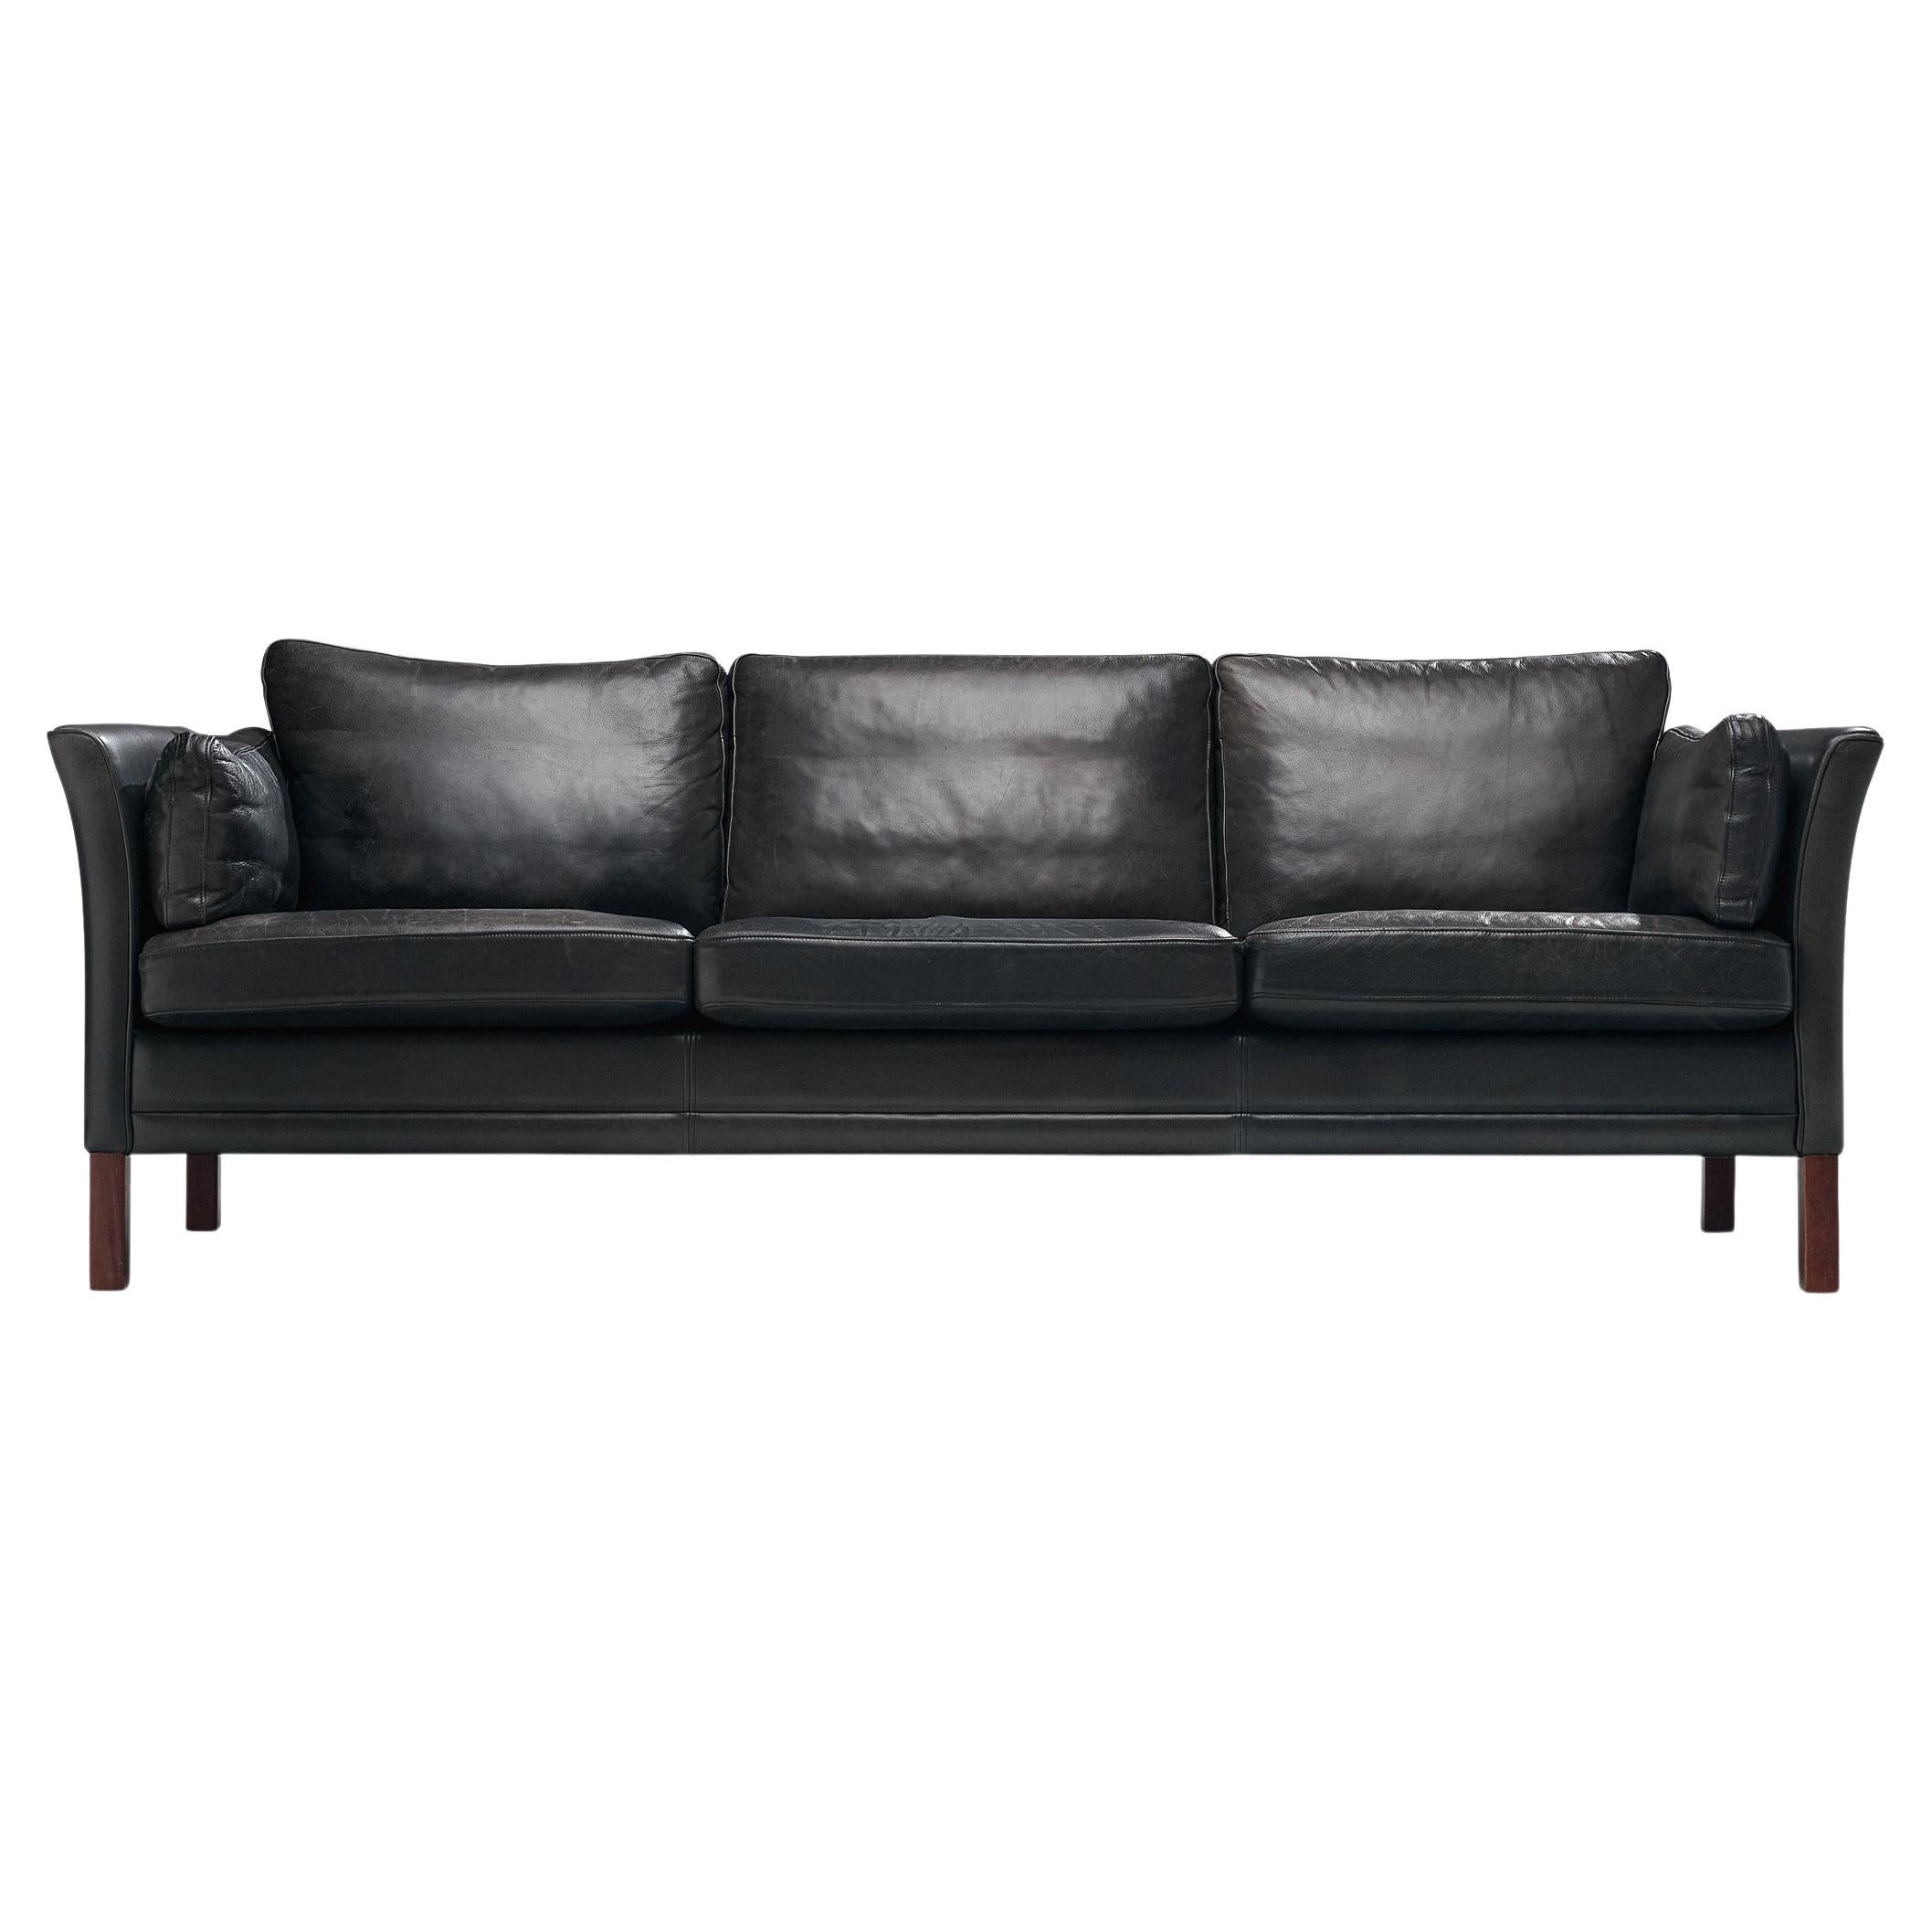 Sofa, leather, wood, Denmark, 1960s

A beautiful three seat sofa made in Denmark in the 1960s. This model reminds of Borge Mogensen's designs. The black leather shows a light patina and is in great condition. The dawn-filled cushions create a